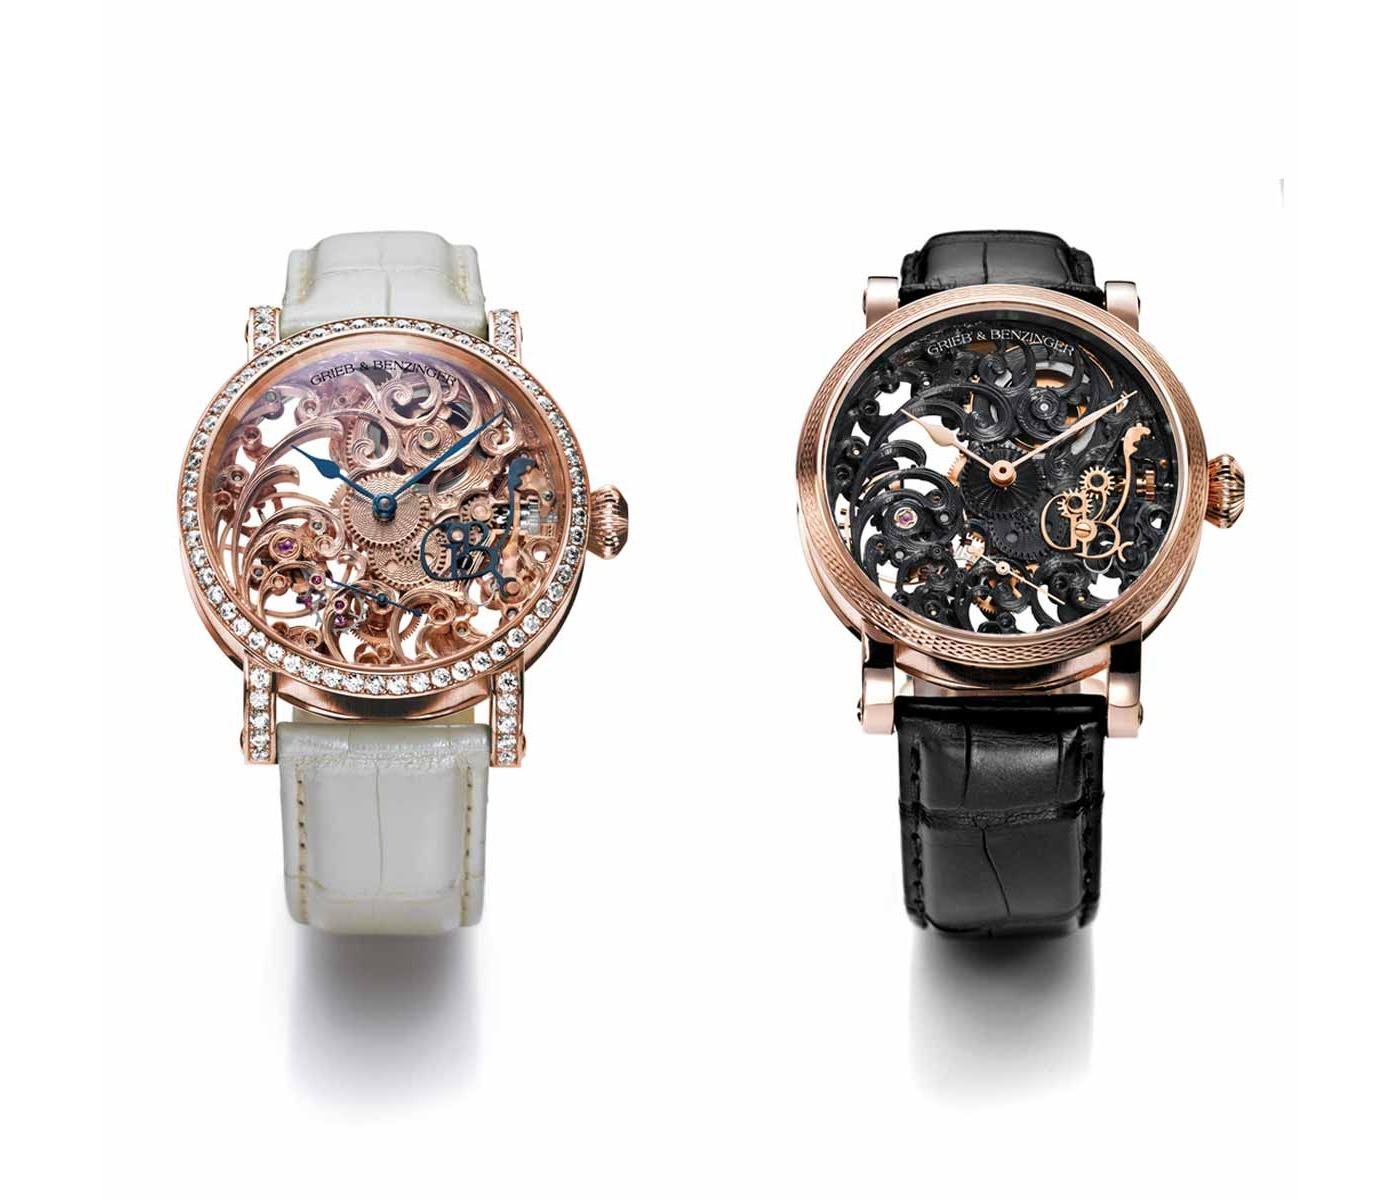 Watches by Grieb & Benzinger